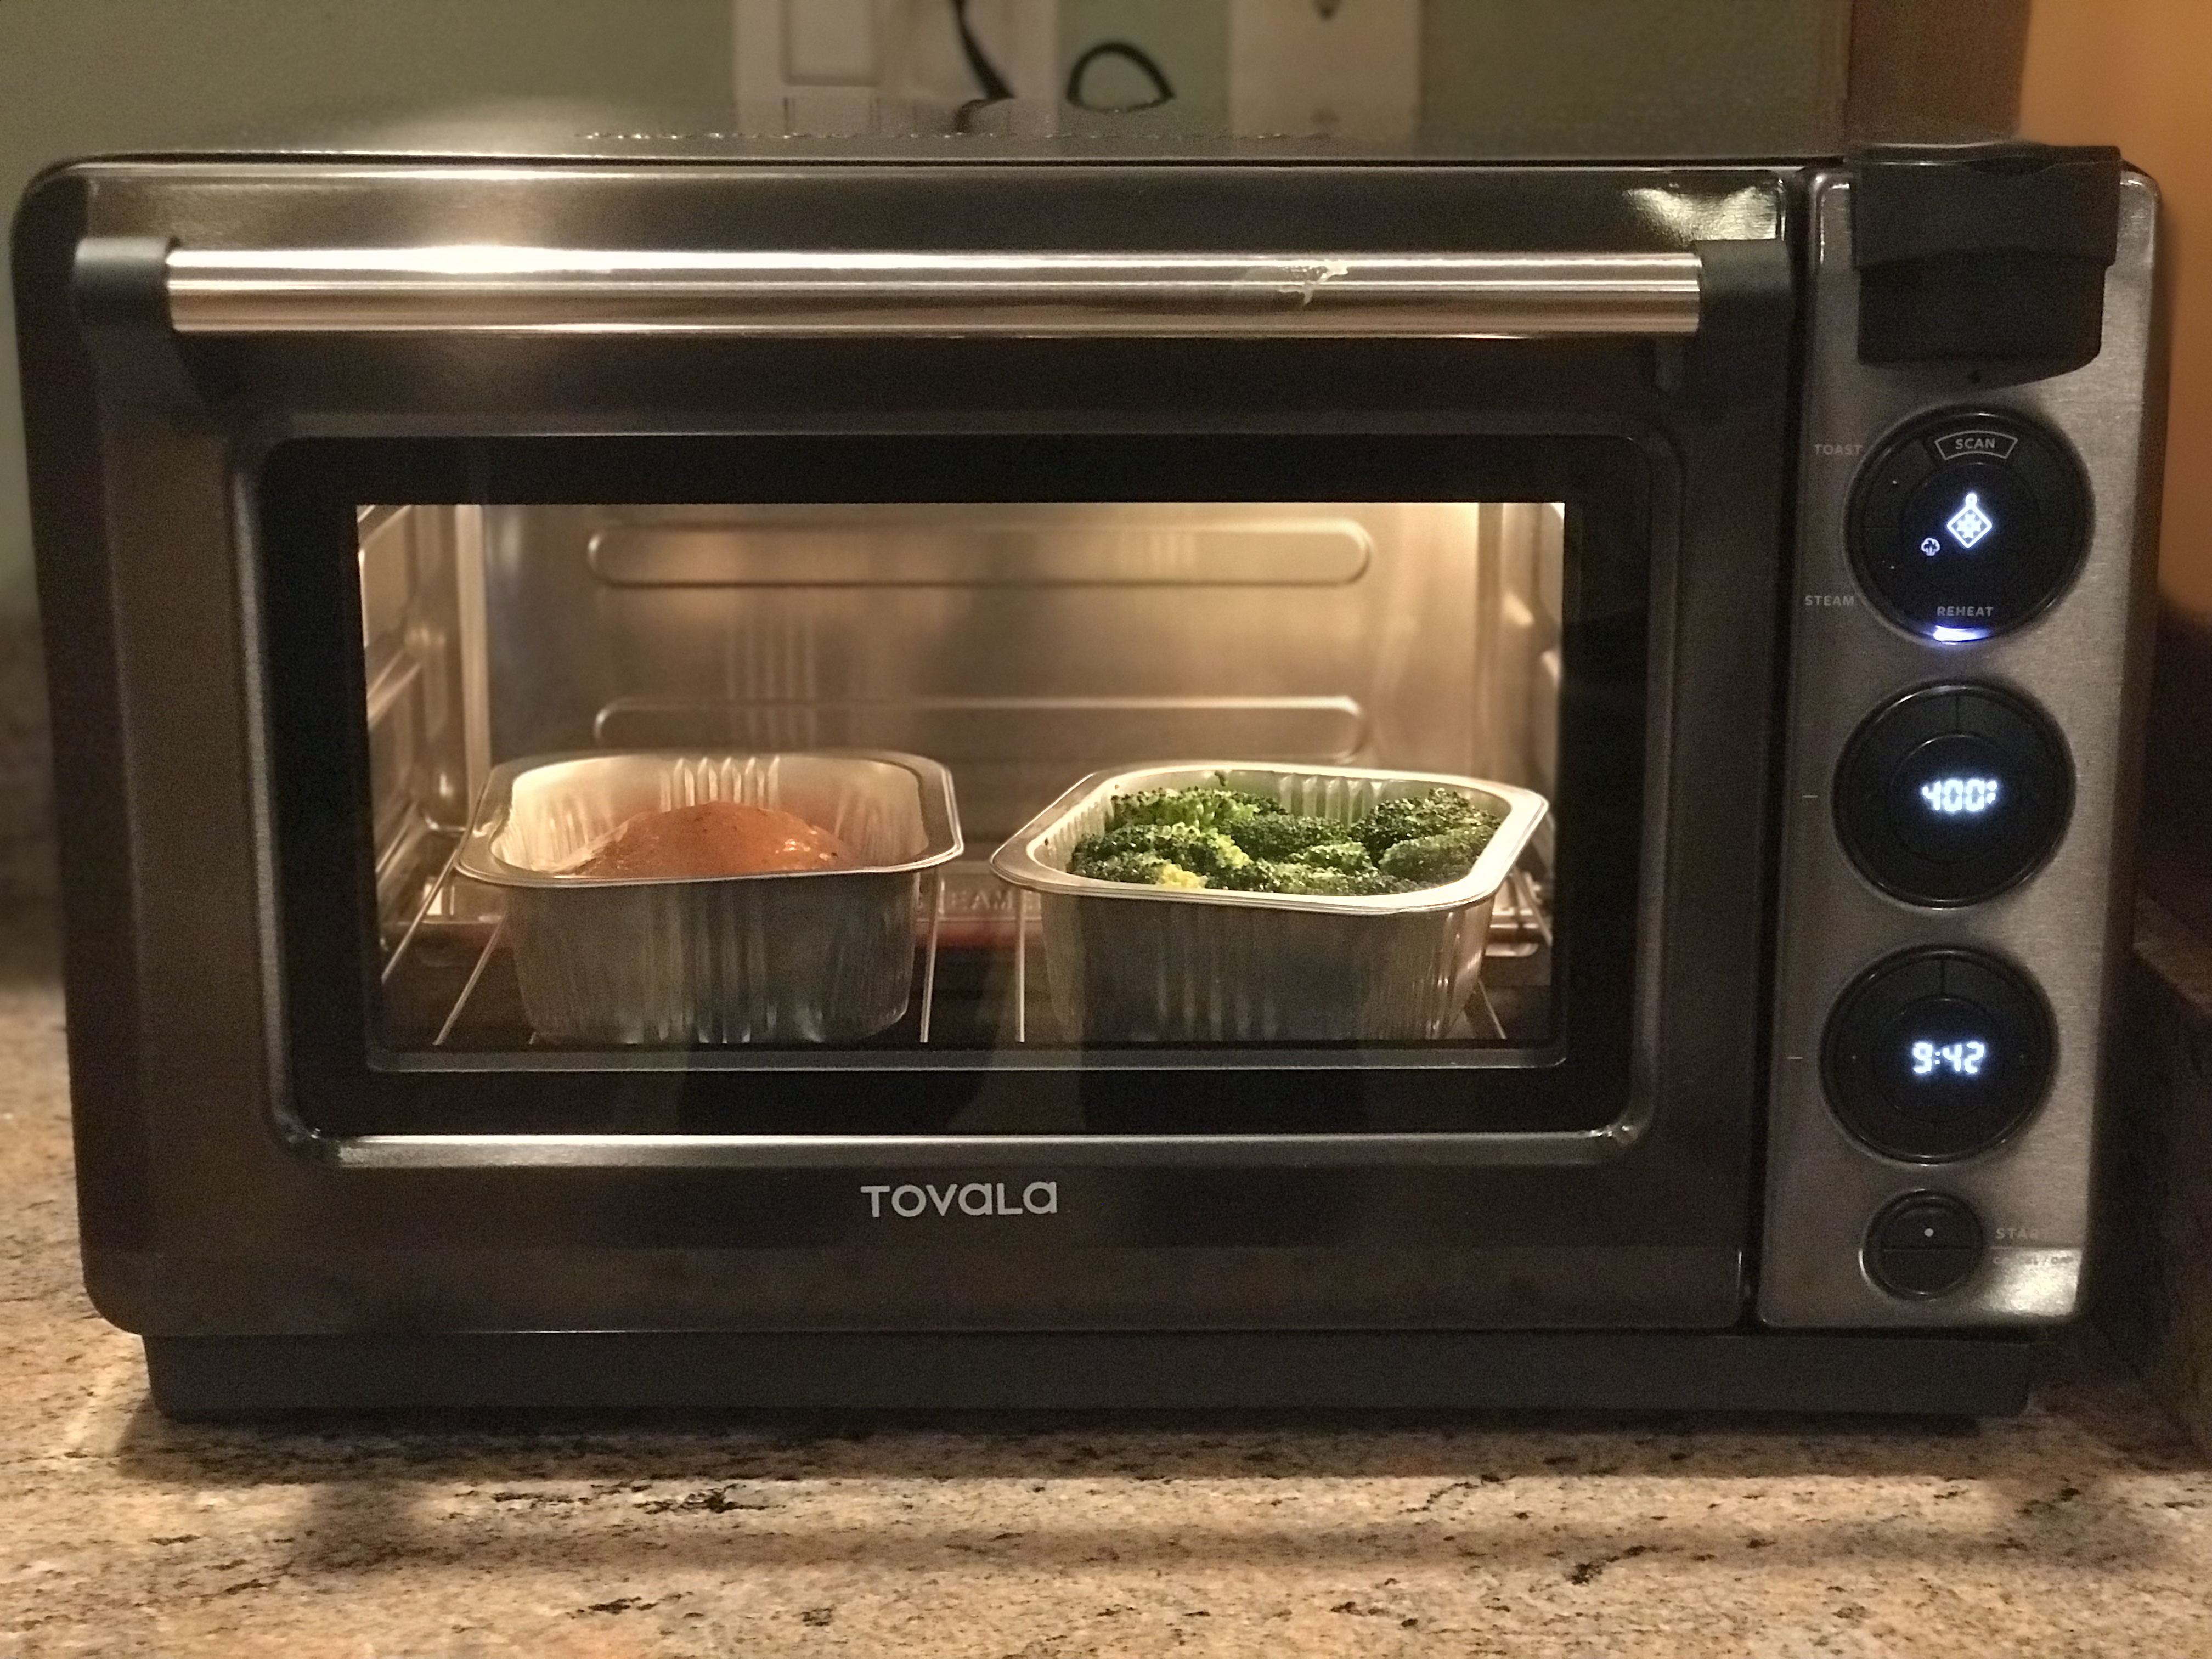 Tovala Introduces Second Generation Smart Oven for $349